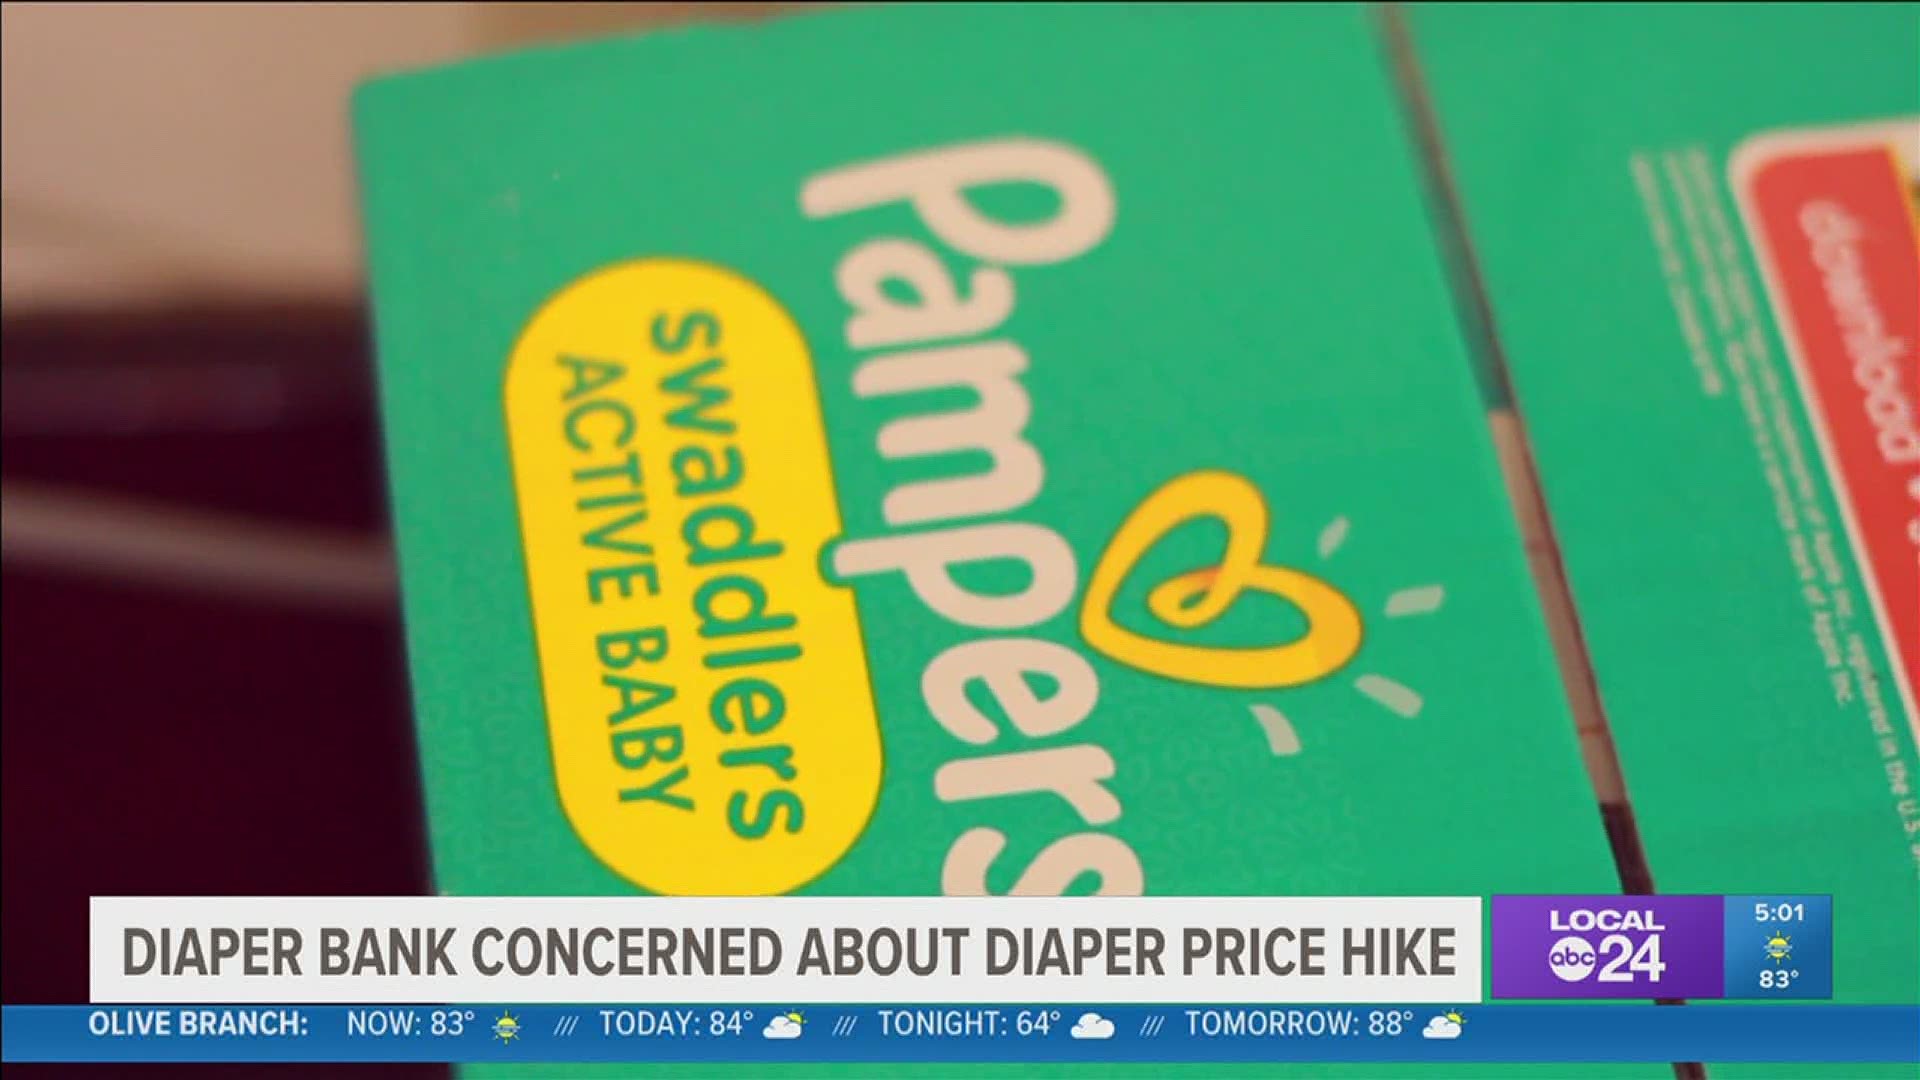 The Bare Needs Diaper Bank is stocking up ahead of diaper price hikes to help families in need.